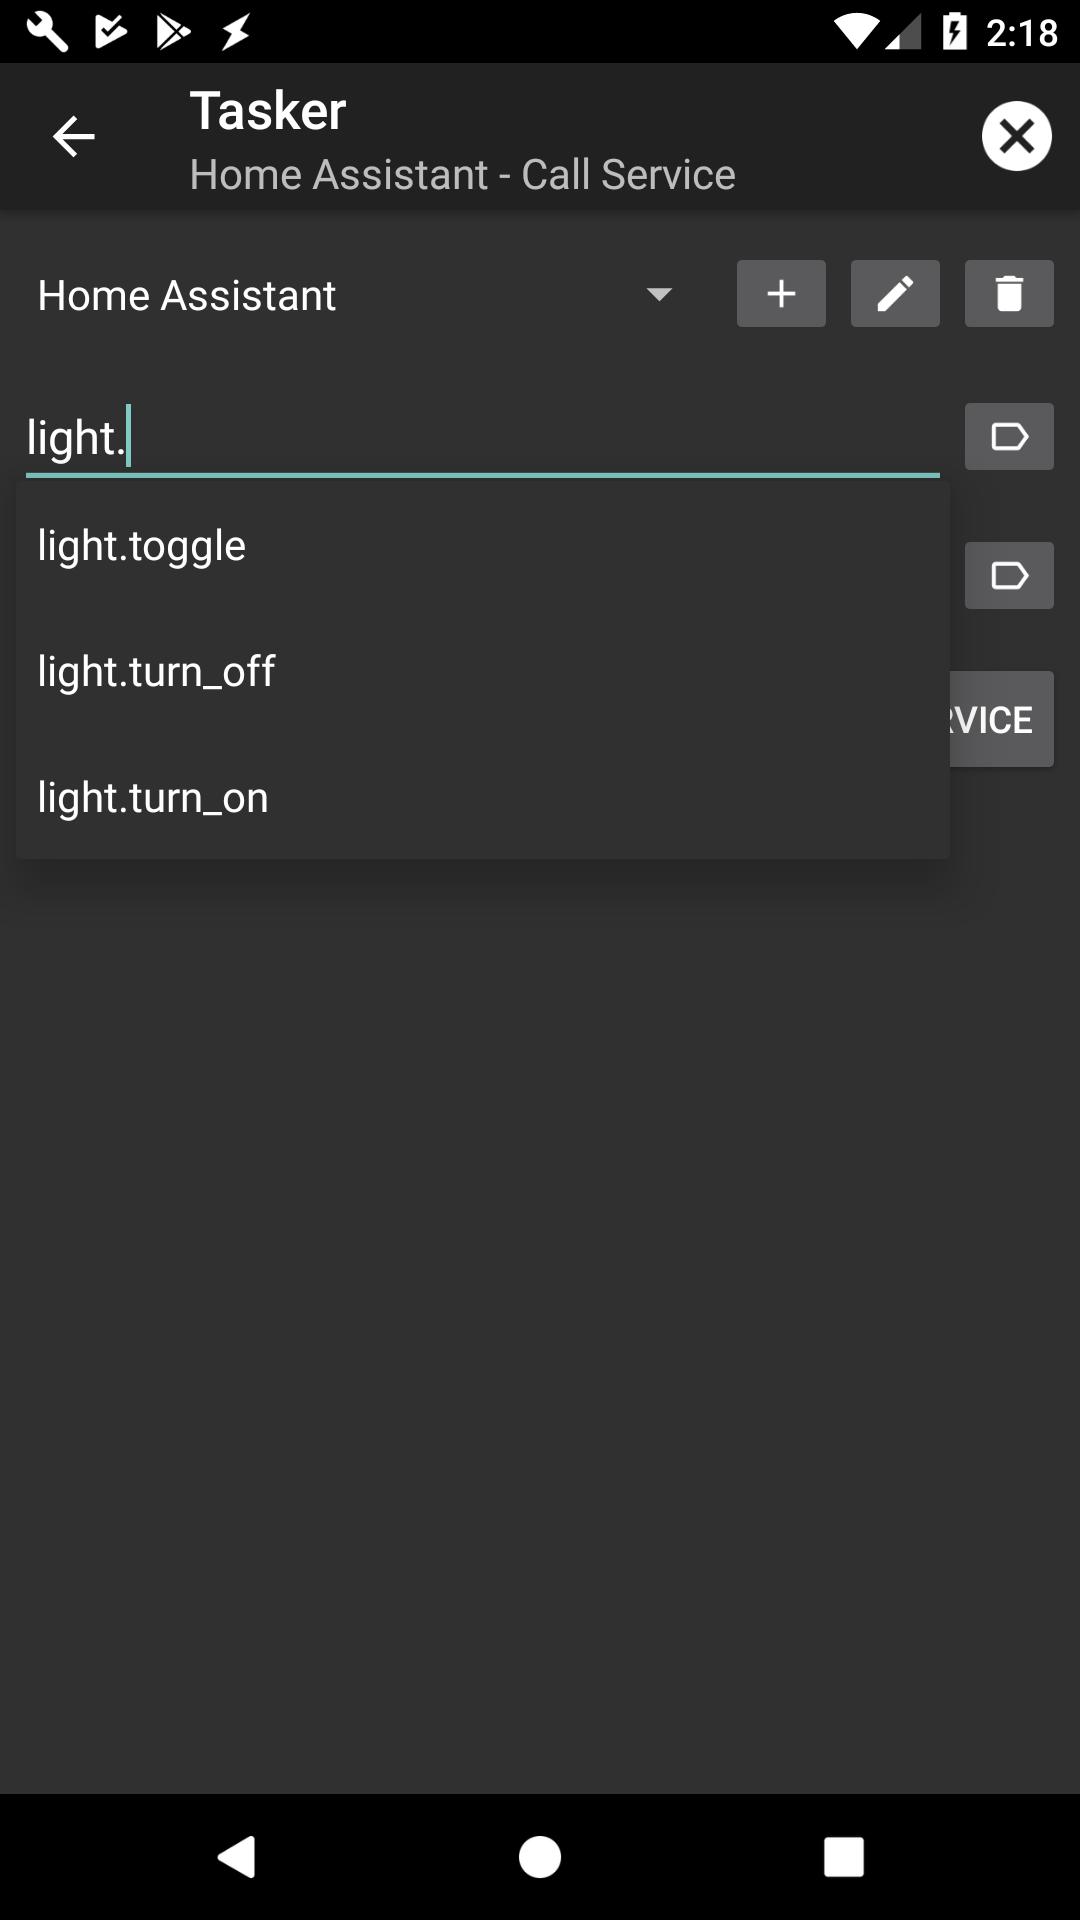 Home Assistant Plug-In for Tasker for Android - APK Download